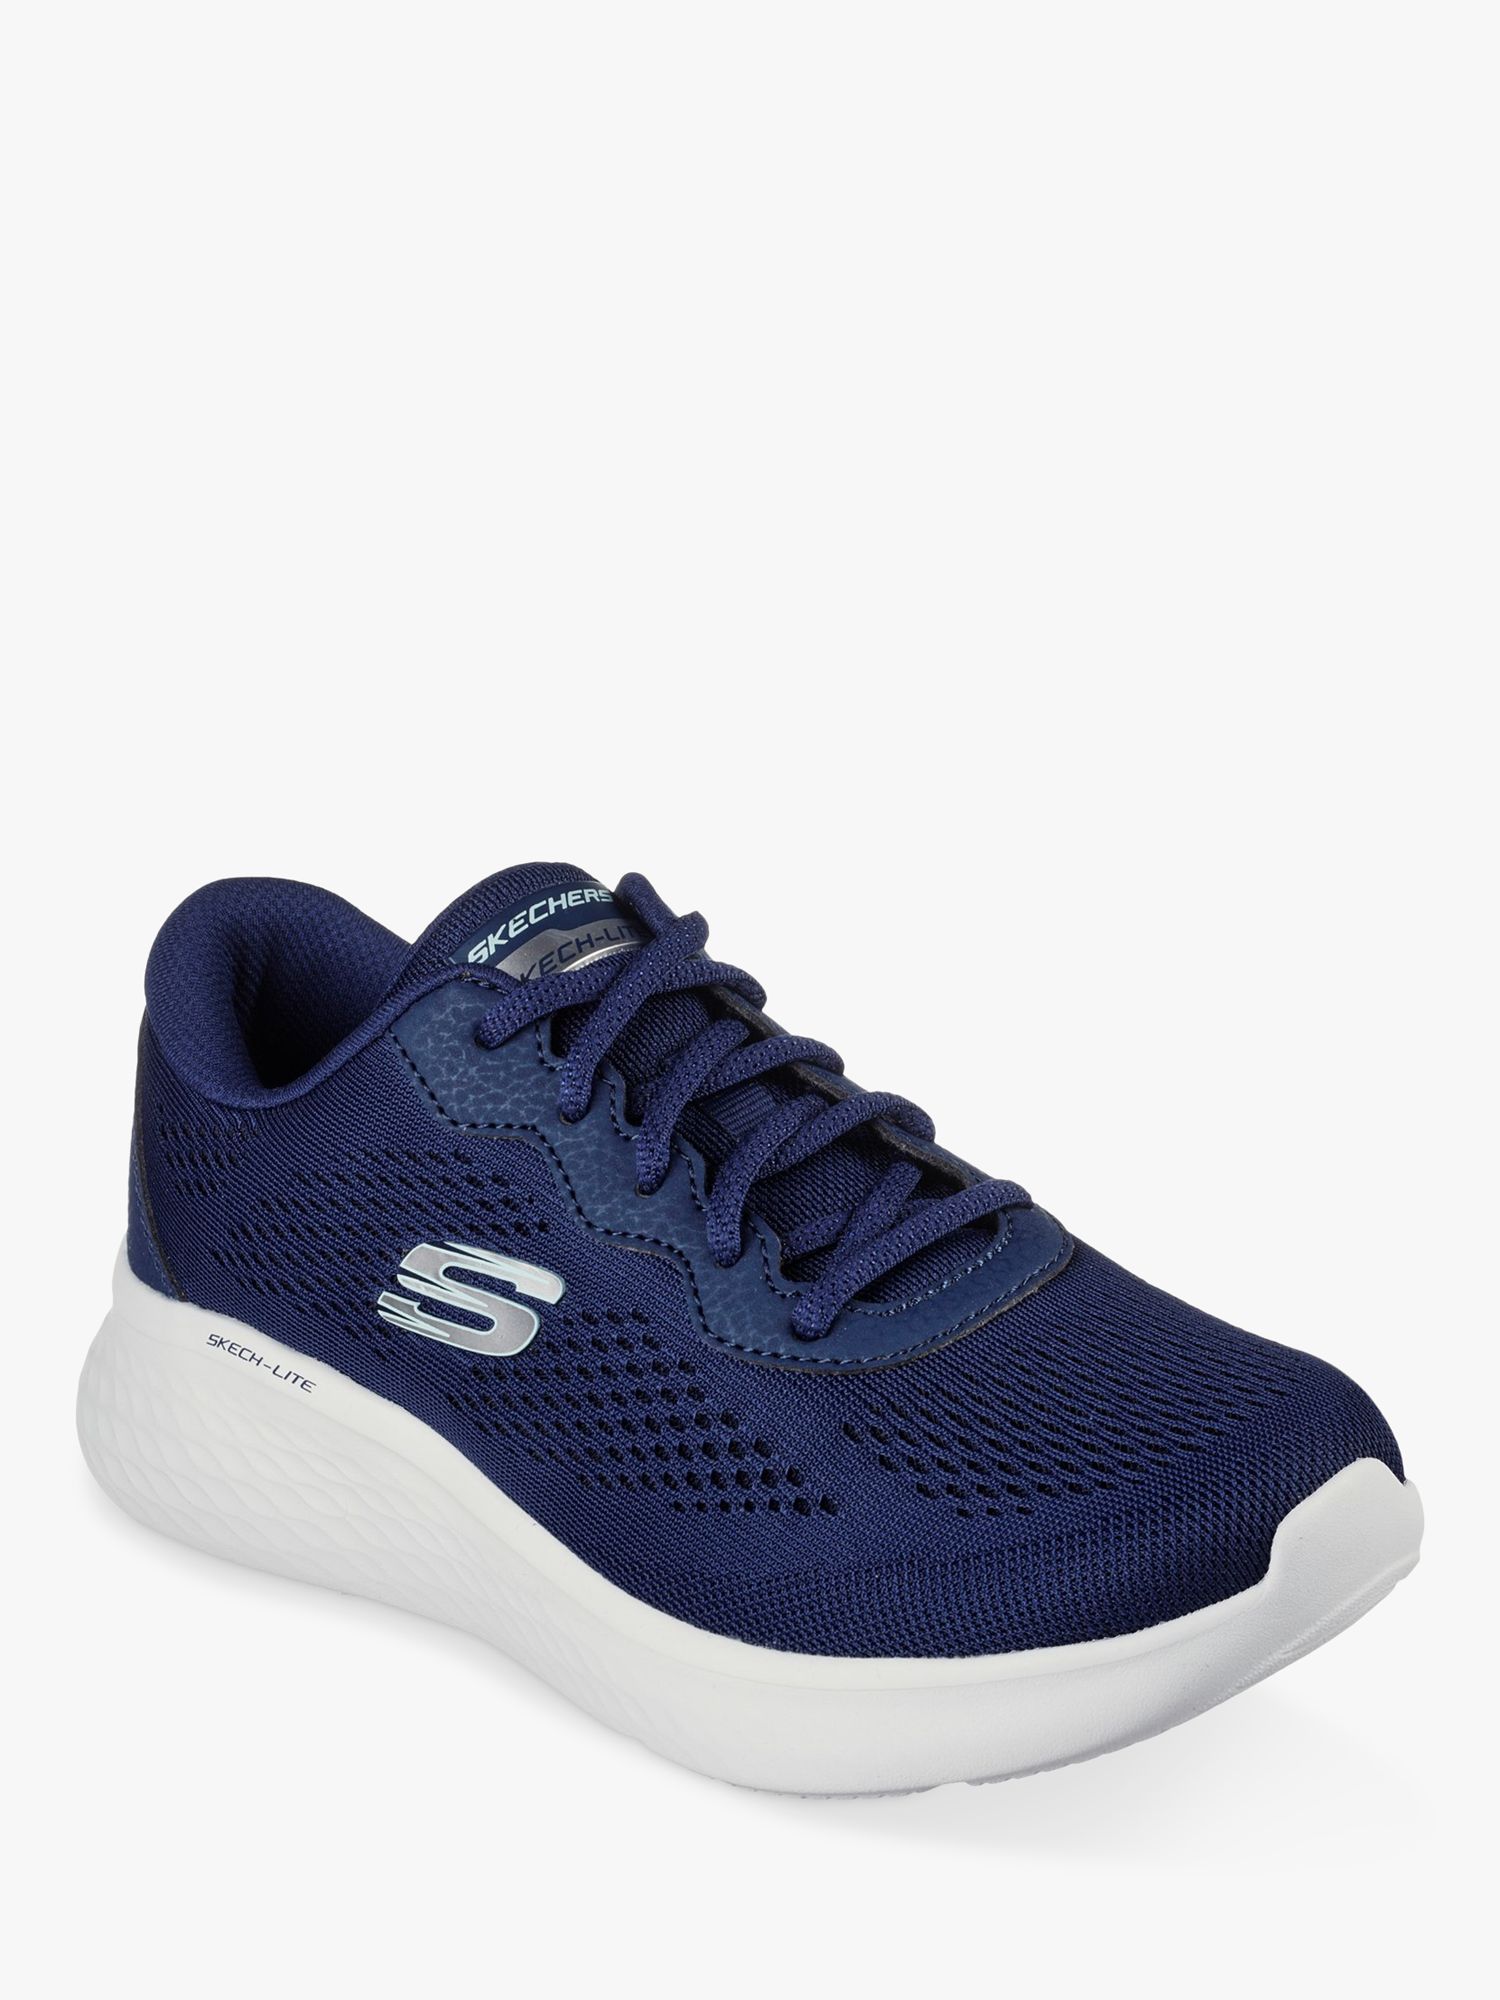 Skechers Skech-Lite Pro Perfect Time Trainers, Navy at John Lewis ...